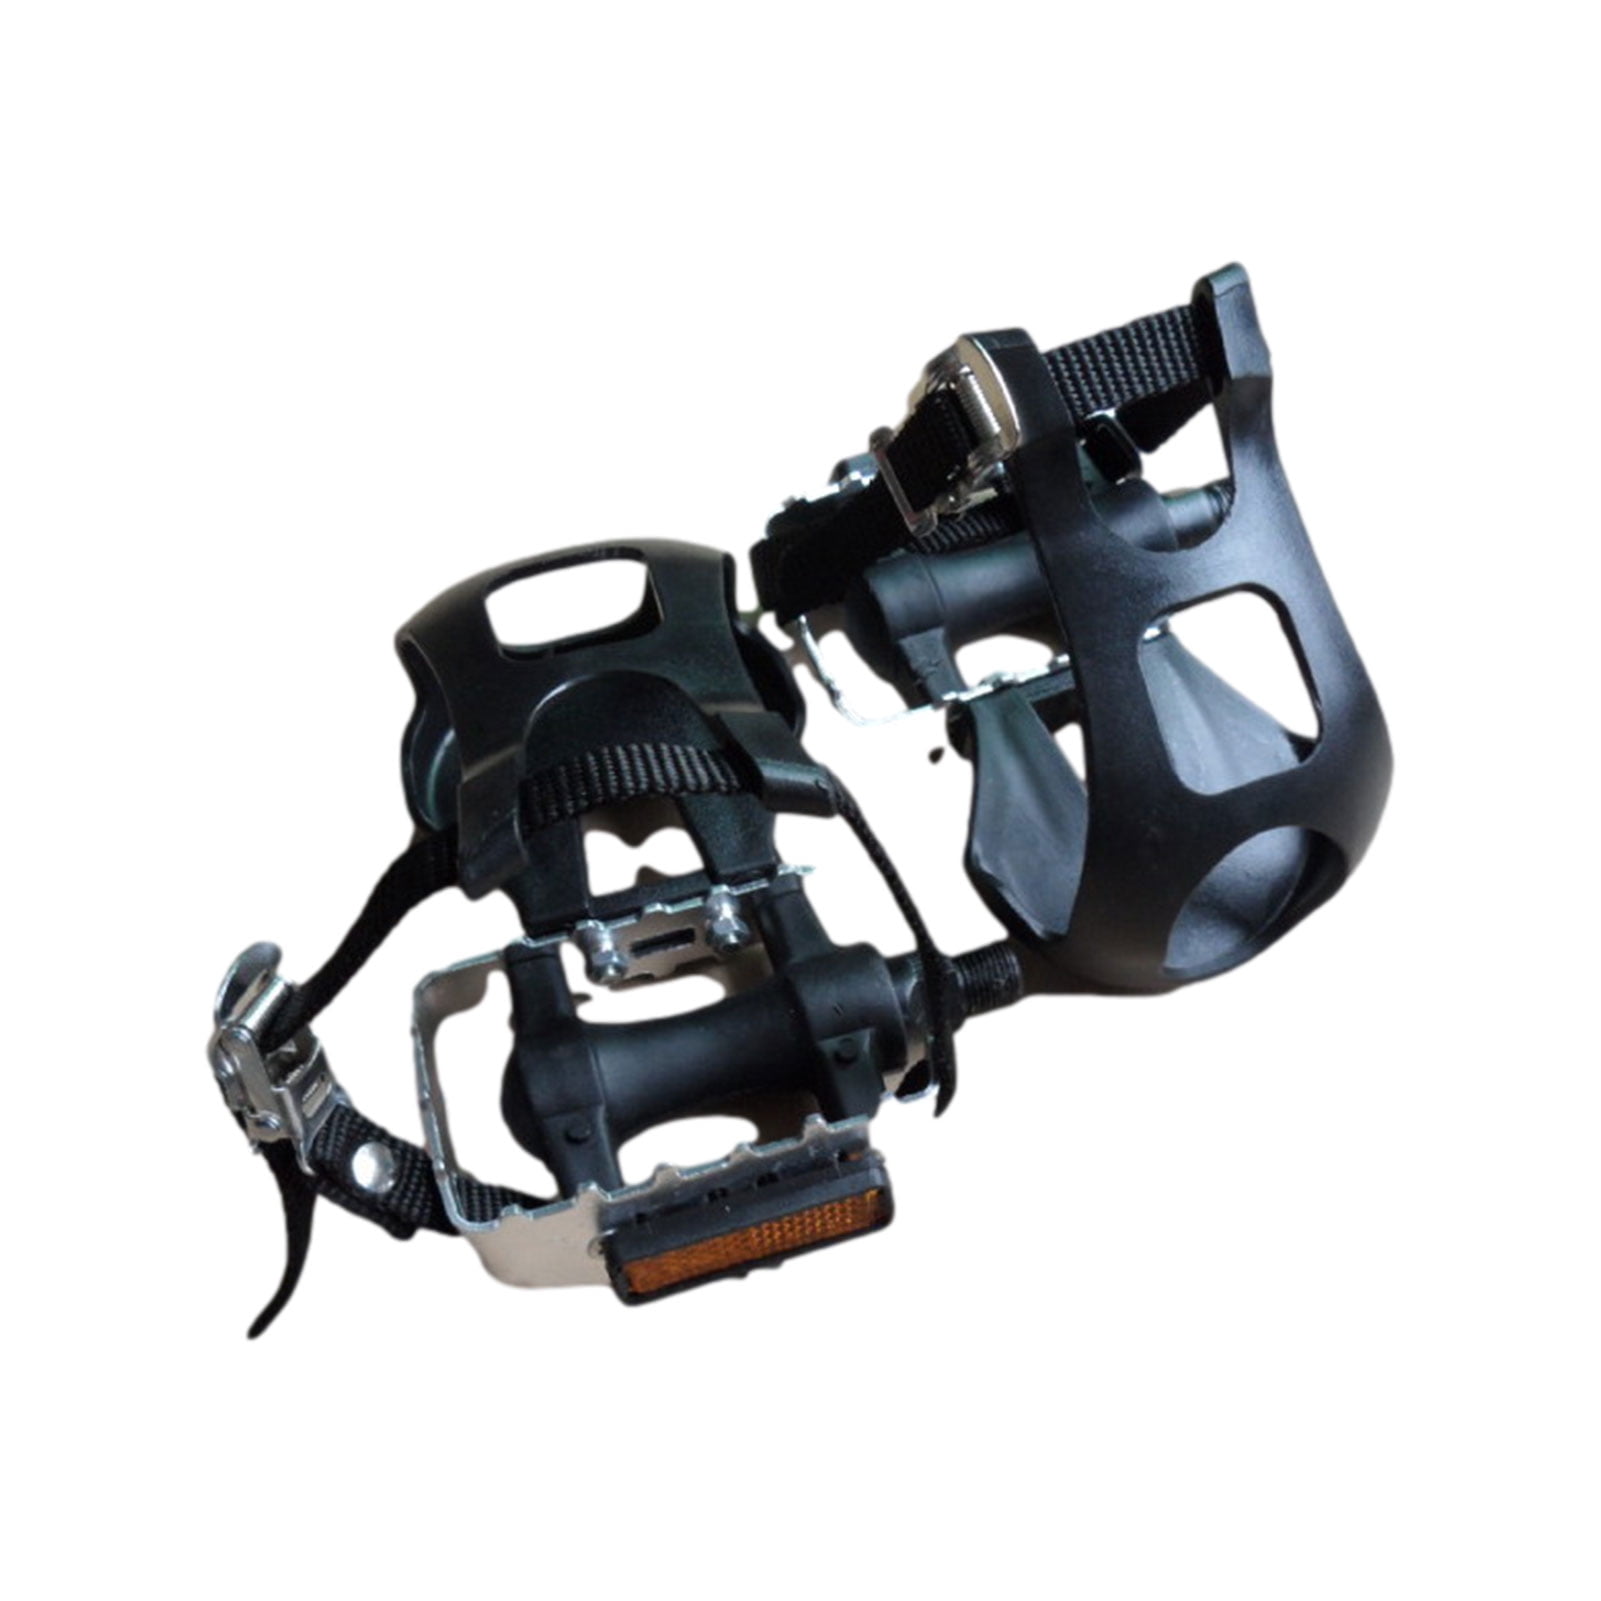 1 Pair Bicycle Pedal MTB Cycling Bike Toe Clip Pedals with Strap Belts 